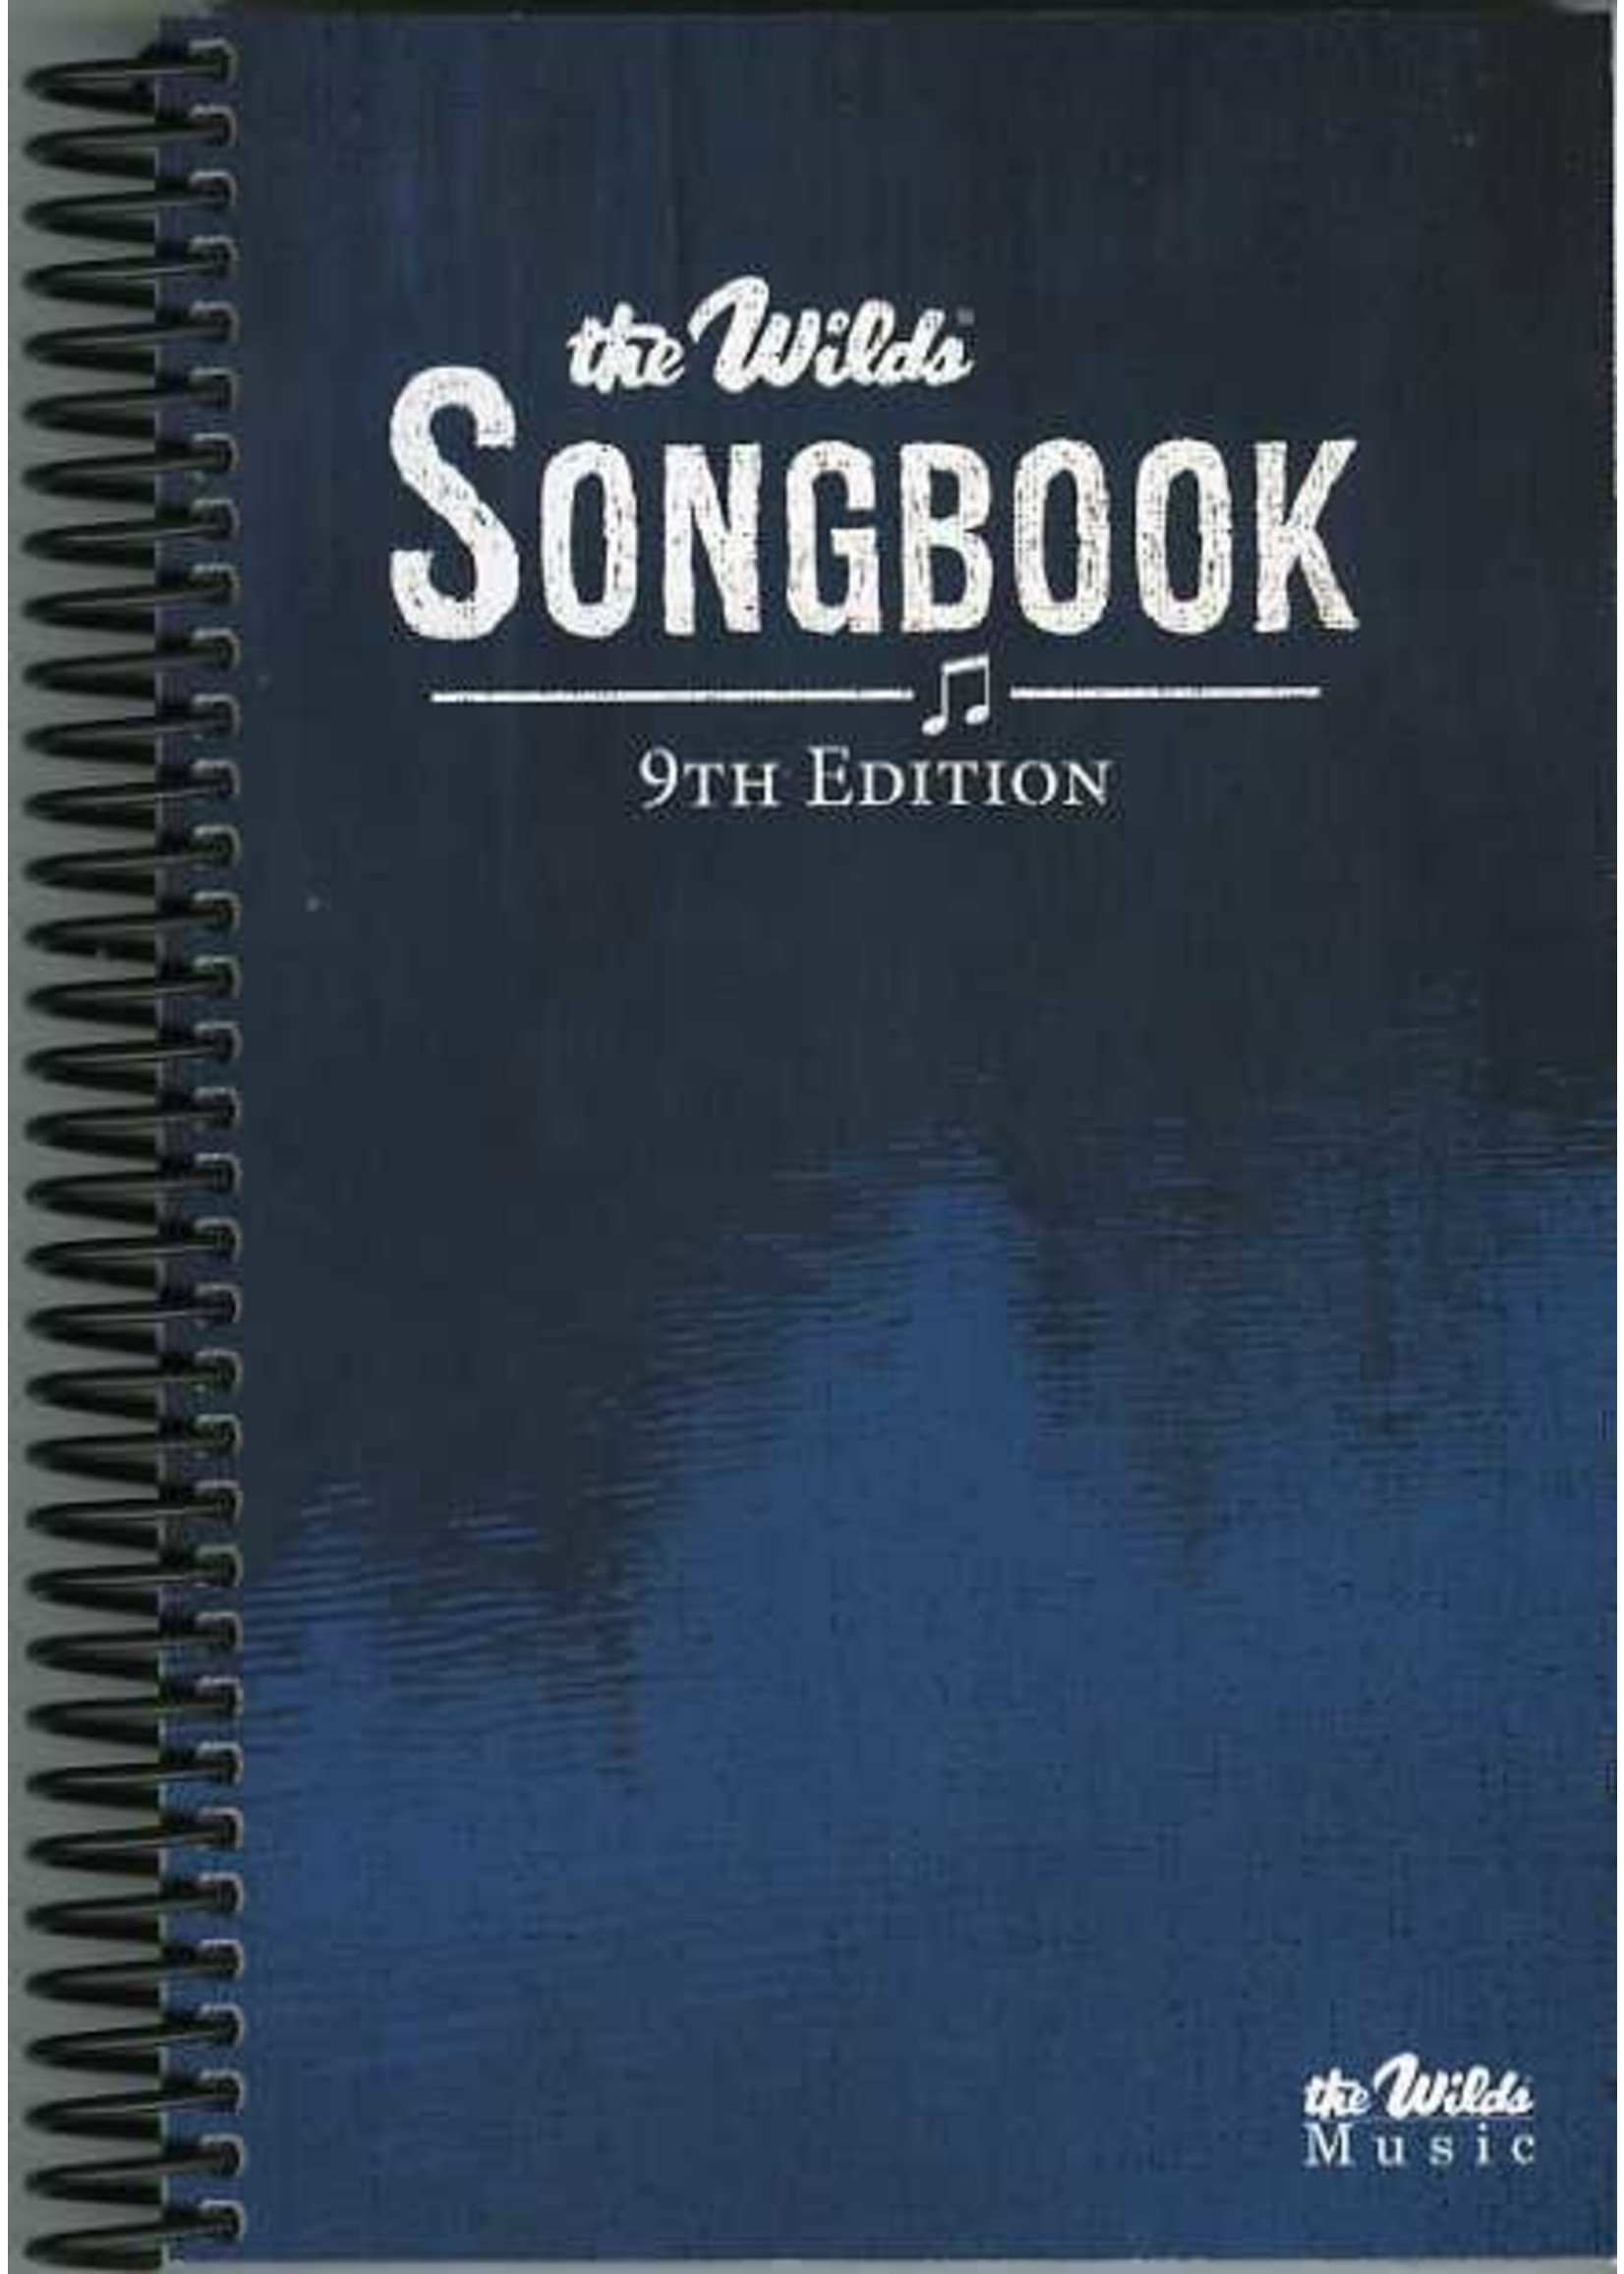 The Wilds Songbook 9th Edition